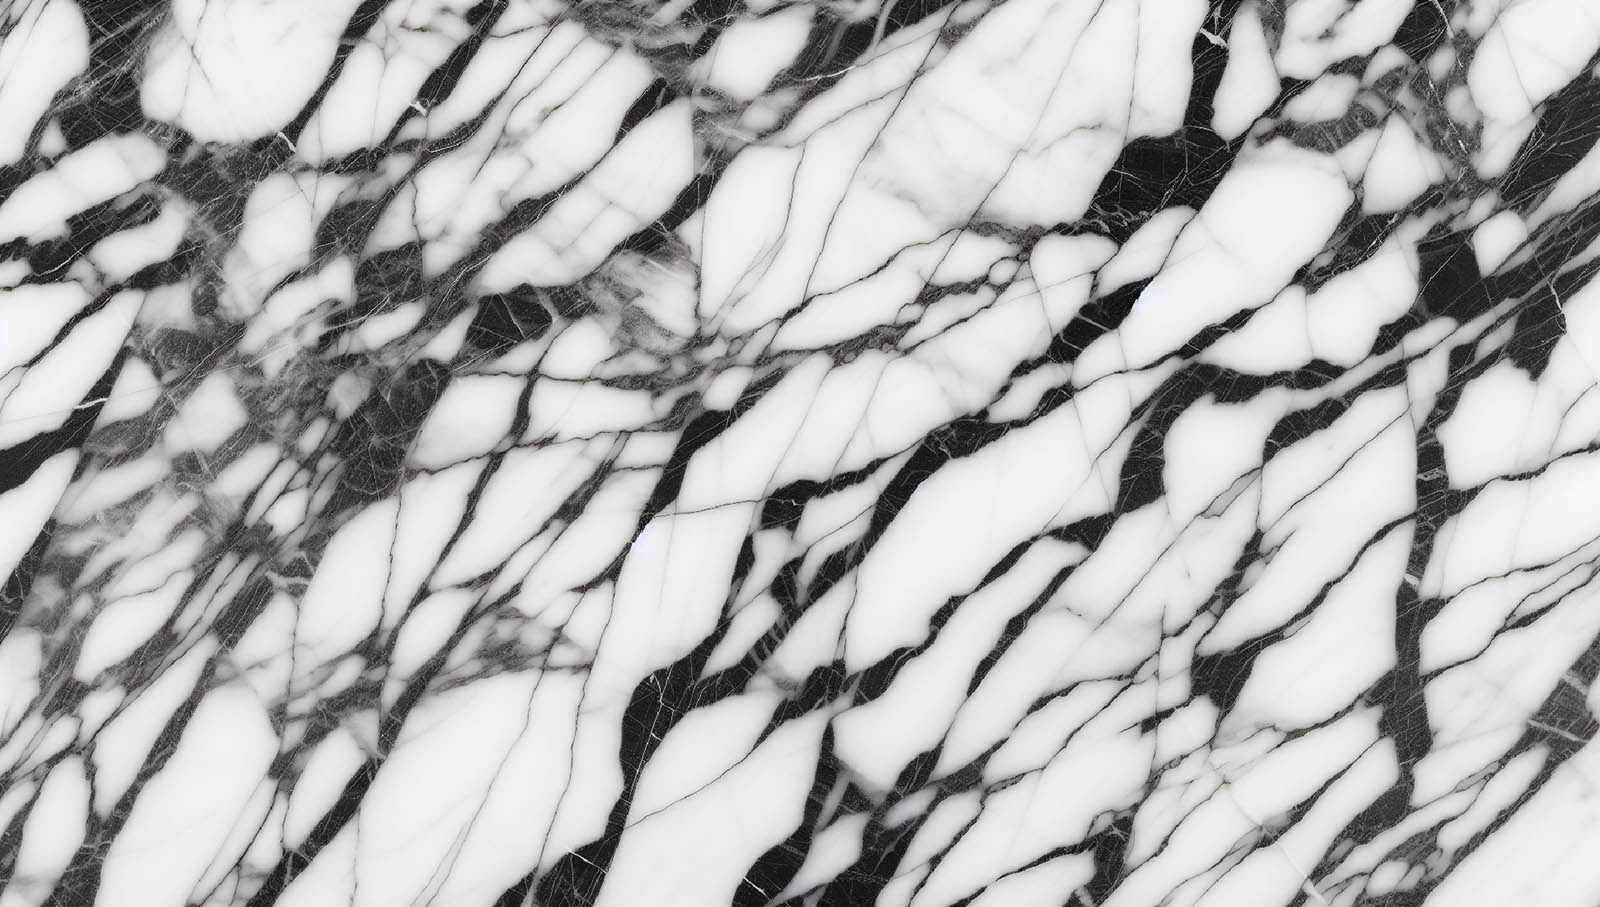 Luxurious marble surface close up image